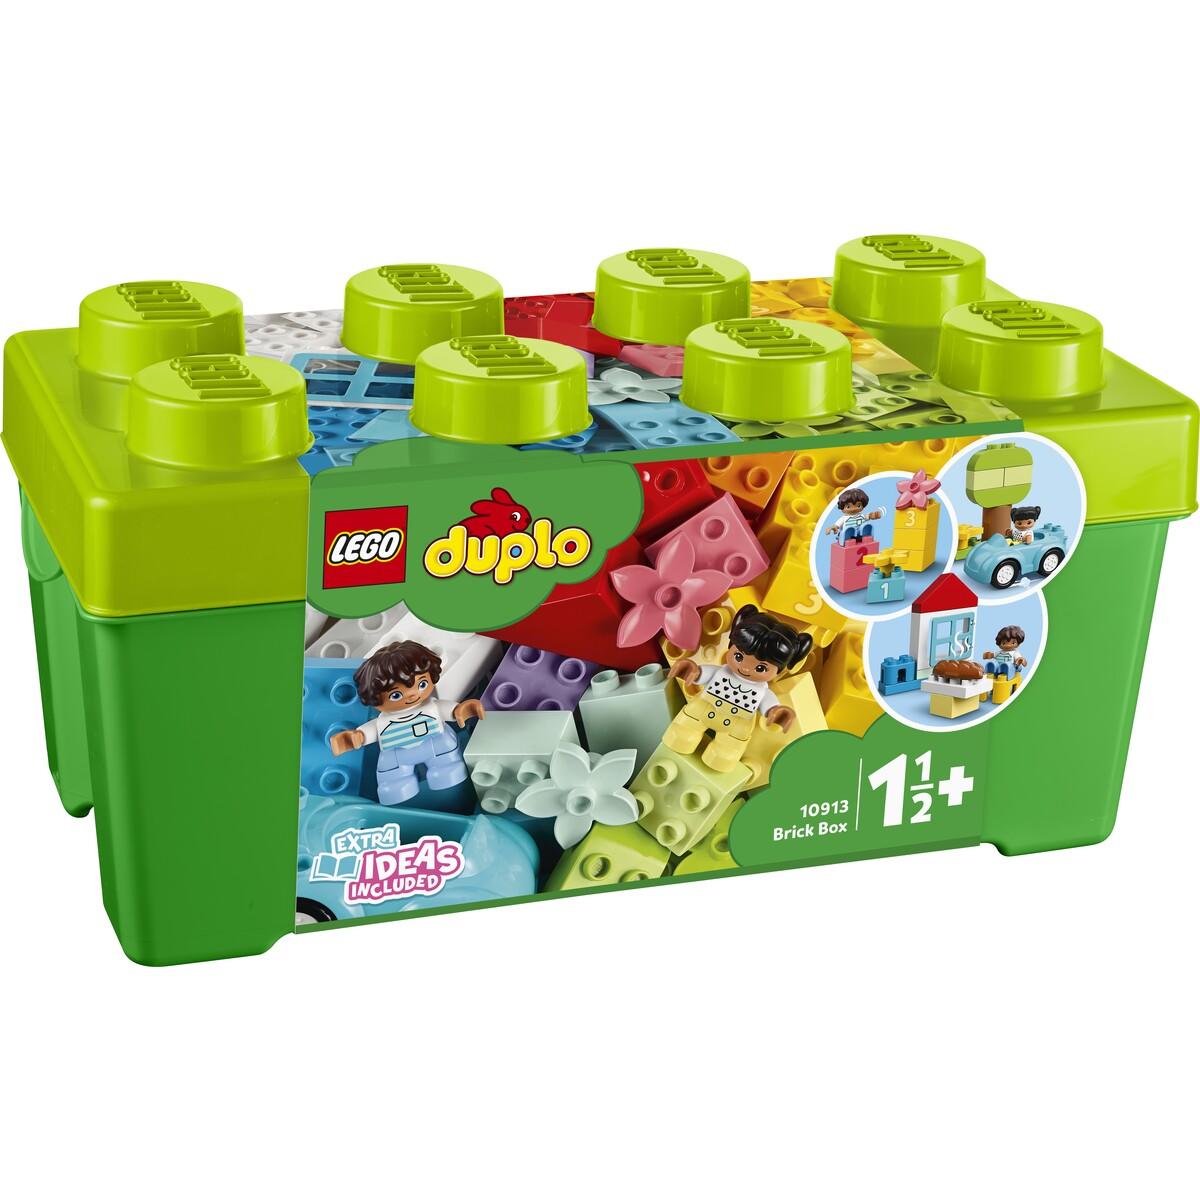 Two-tone green box containing the Duplo pieces.